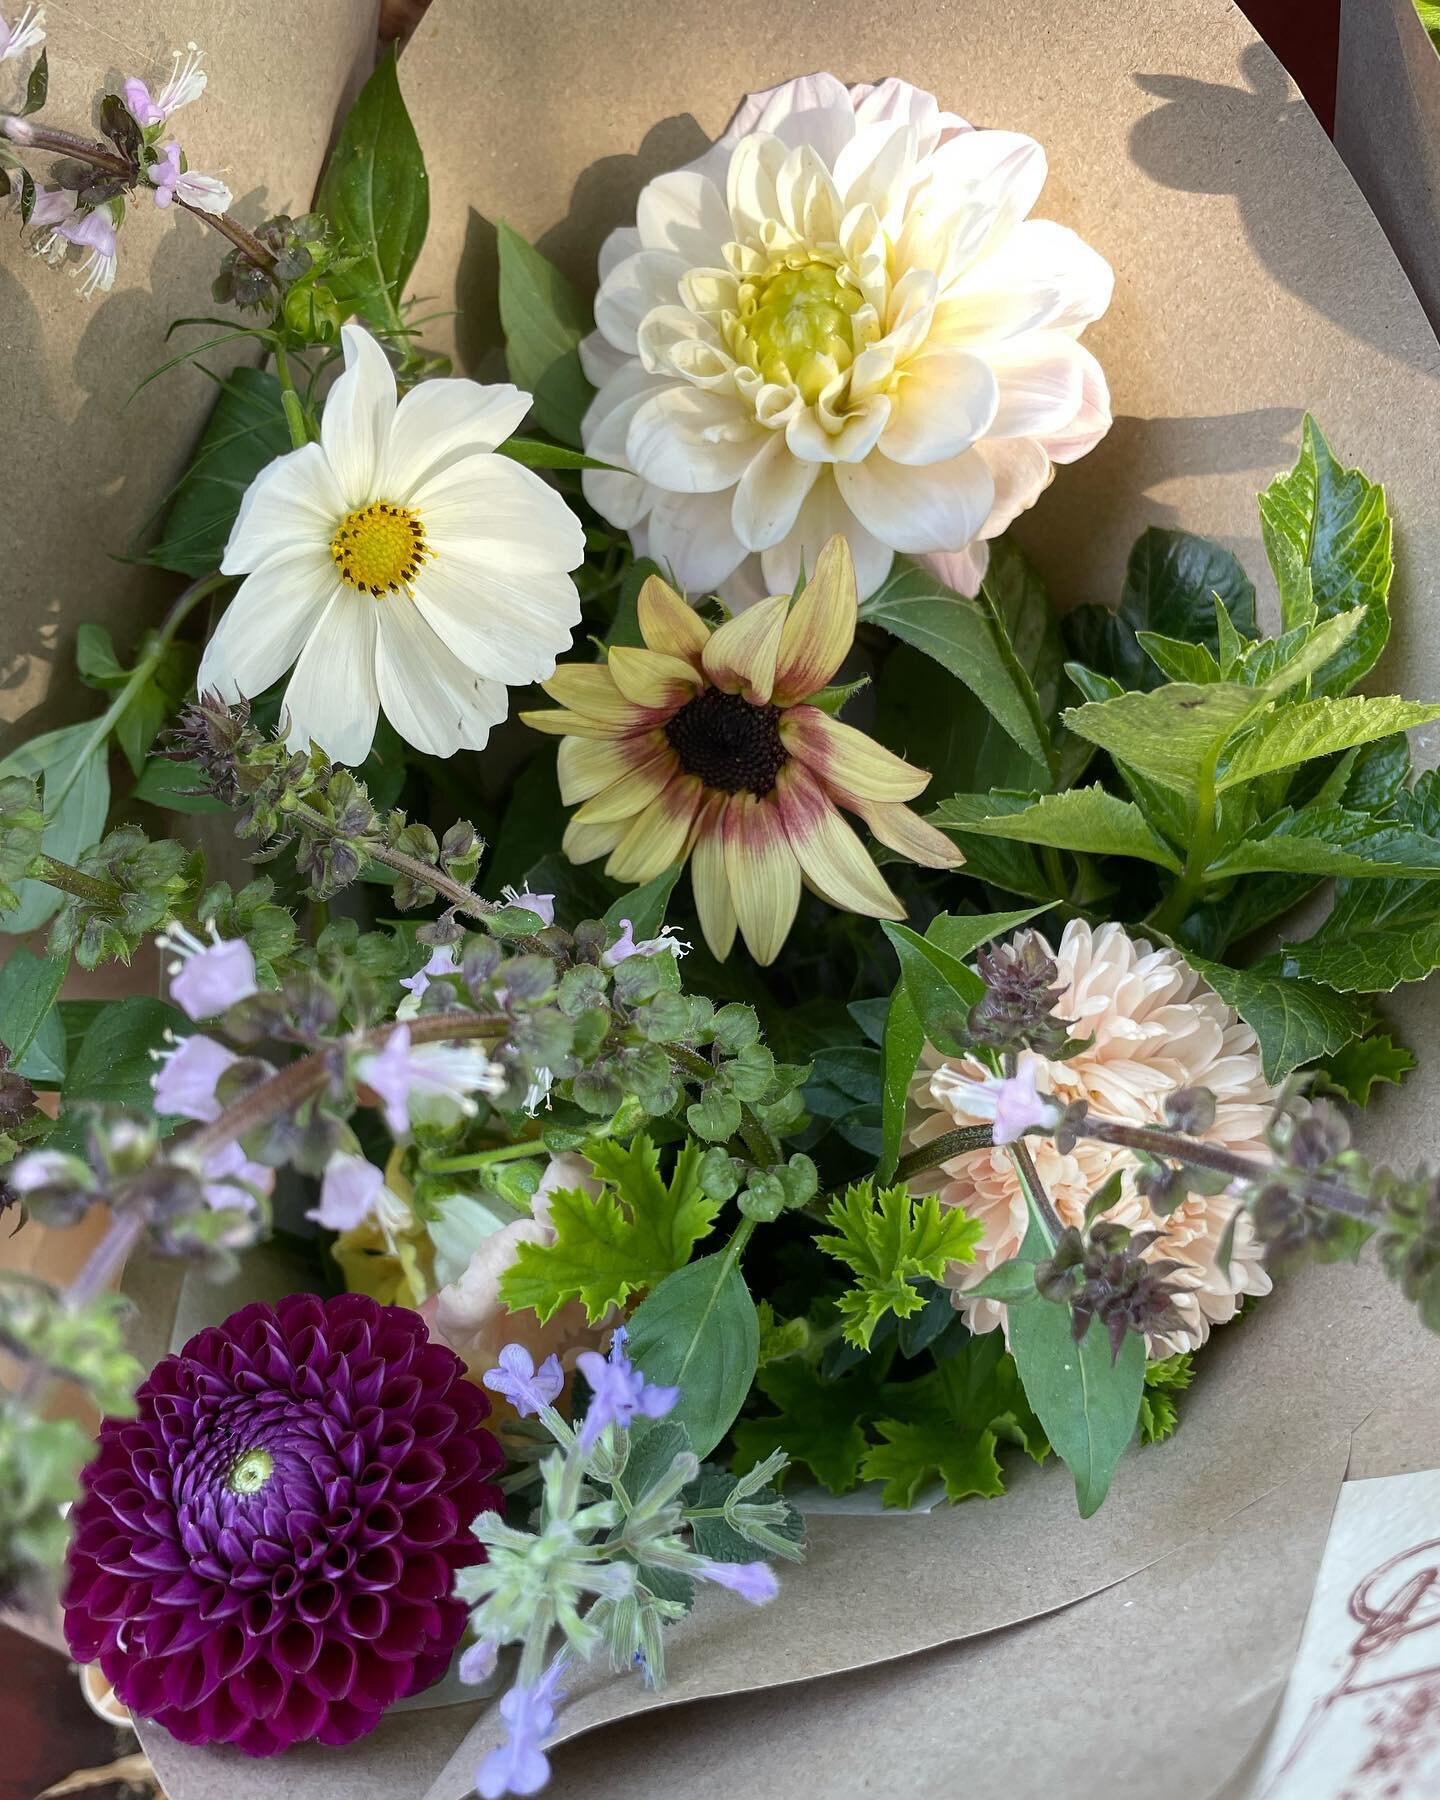 Late Autumn Bouquets on sale @lizzysonthegreen or order a larger weekend bouquet (&pound;35 inc. free local delivery). Vicarage Flowers is based in Canonbury, close to Newington Green, Highbury, Mildmay &amp; Dalston.  #supportsmallbusiness #locallyg